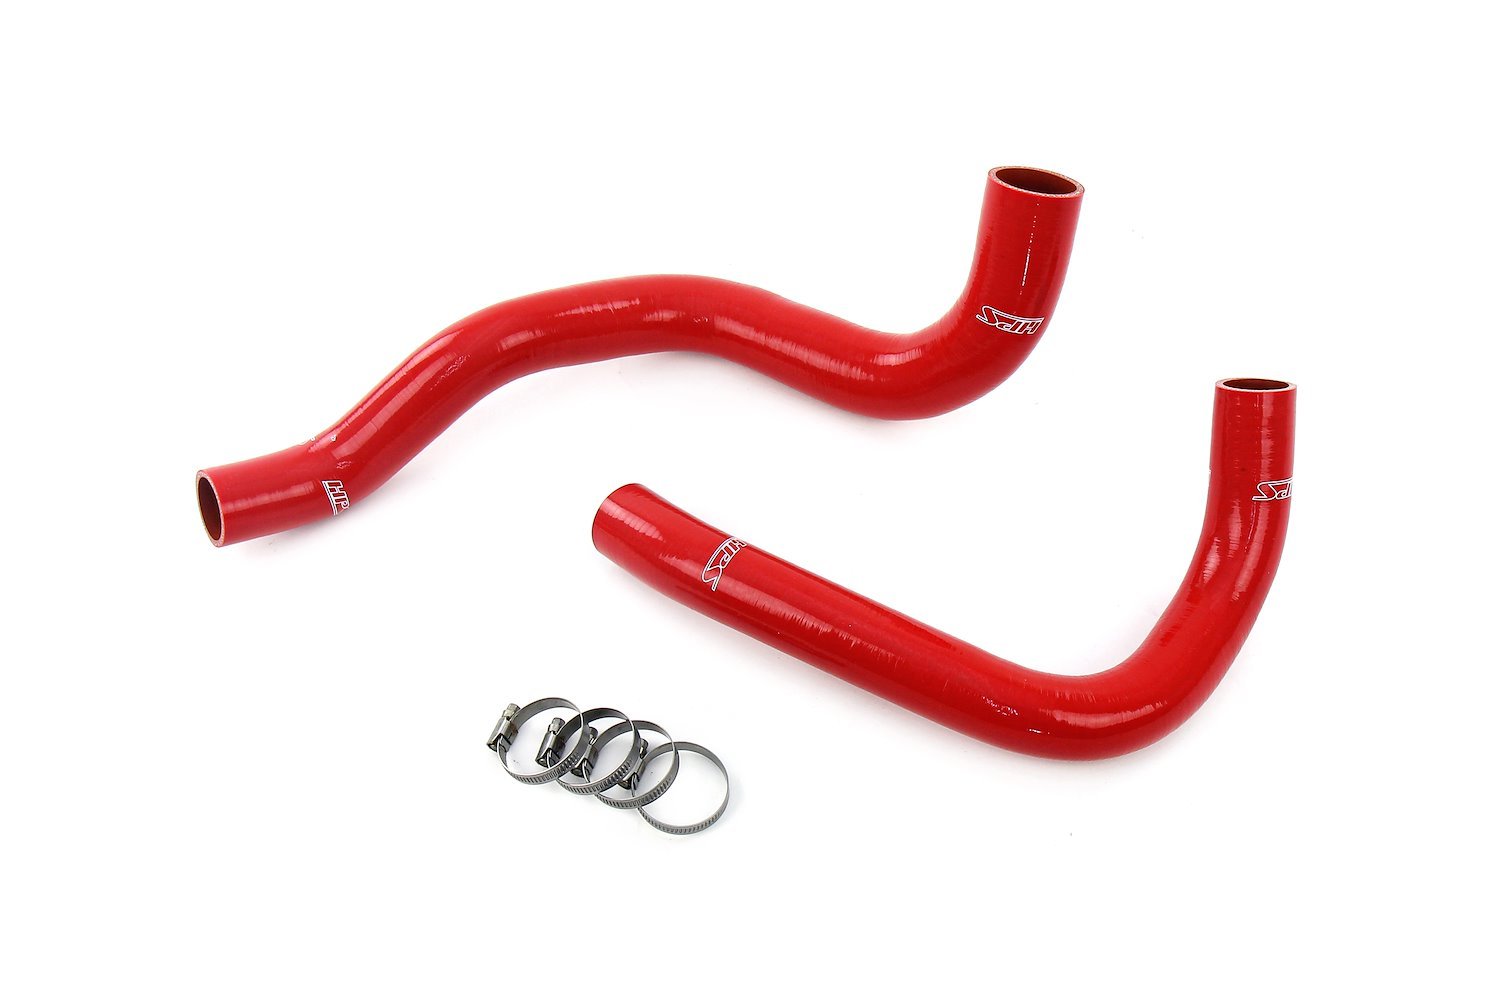 57-2129-RED Radiator Hose Kit, 3-Ply Reinforced Silicone, Replaces Rubber Radiator Coolant Hoses